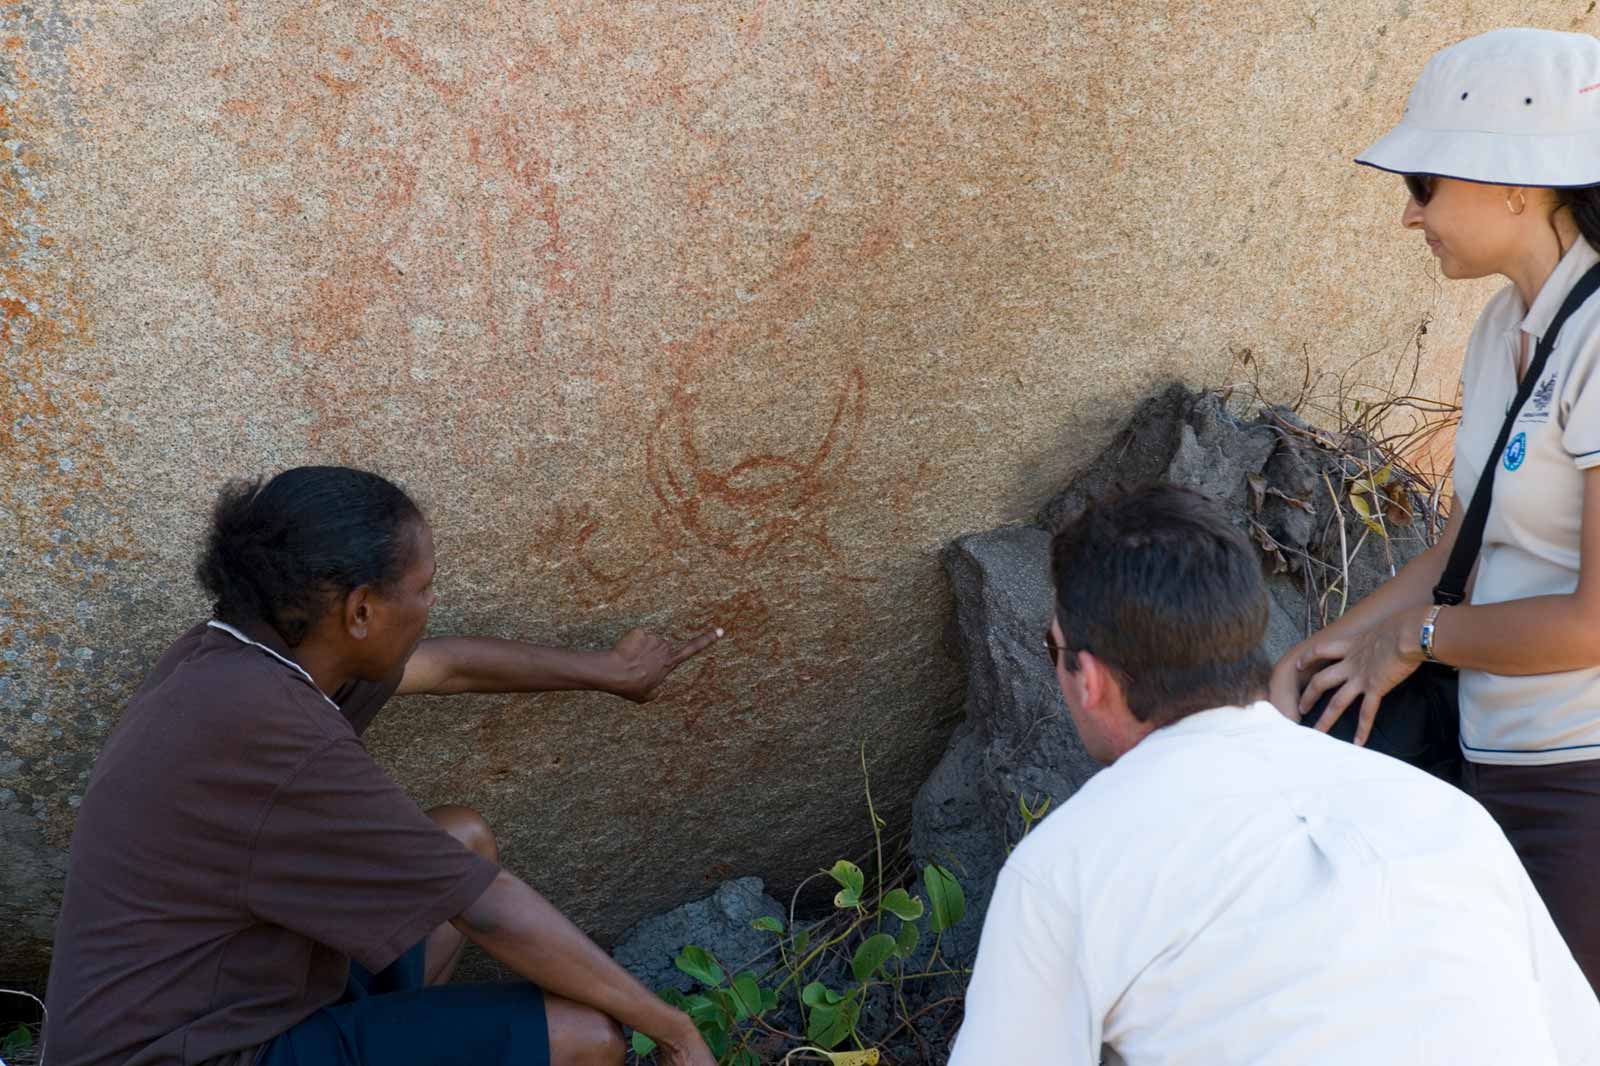 One person points to an example of rock art, while two others look on.